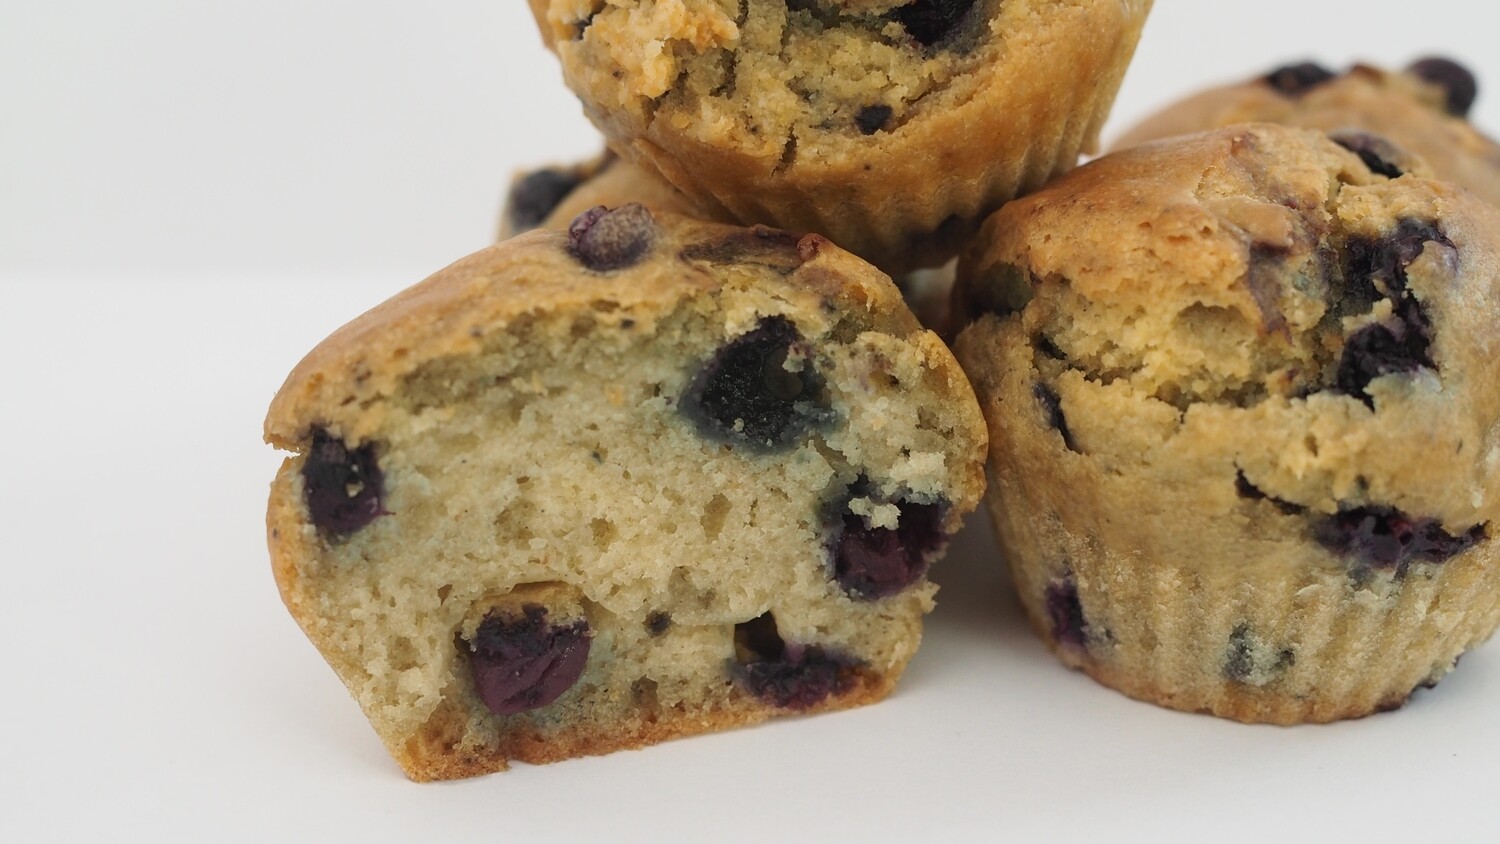 Vegan blueberry muffin with a hint of lemon flavor. GLUTEN FREE available. (Minimum order of 3).